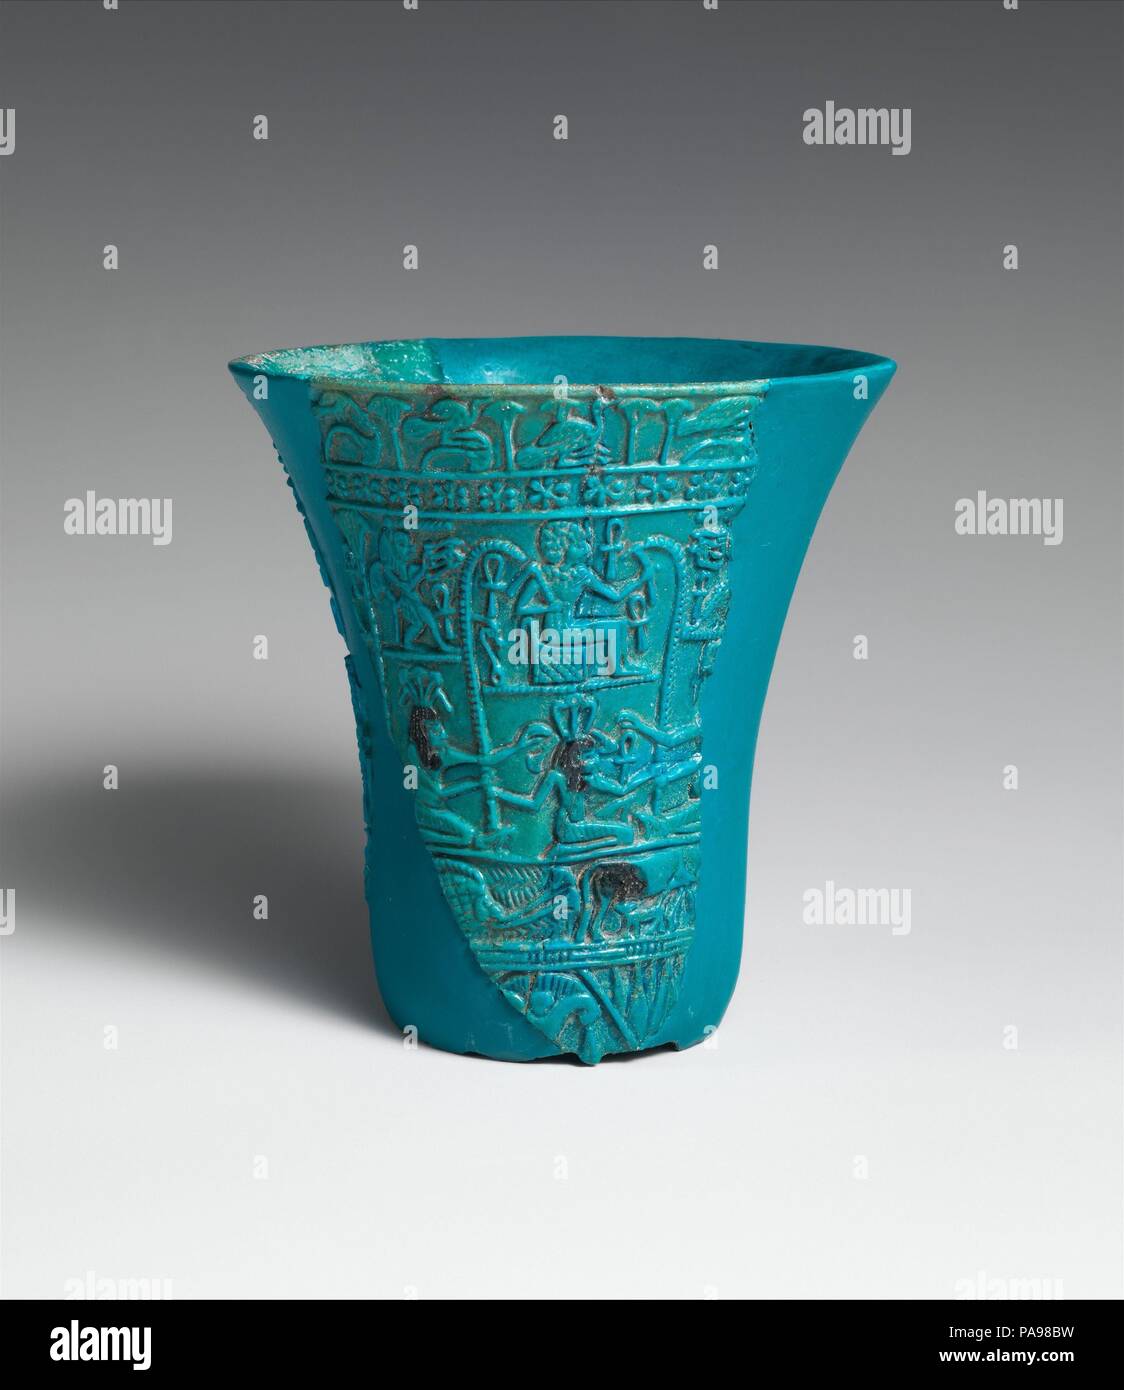 Reconstructed lotiform chalice. Dimensions: As reconstructed: H. 9.9 cm (3 7/8 in.); Diam. 9.3 cm (3 11/16 in.). Dynasty: Dynasty 21-25. Date: ca. 1070-664 B.C..  Made of faience glazed a rich turquoise, this goblet takes the shape of the fragrant blue lotus. Reconstructed from eight fragments, it would originally have stood on a slender column imitating the flower's stalk. (For a complete example, see 13.182.53.) This type of chalice, which is seen first in the New Kingdom, appears to have been used primarily as a cult vessel.  Both the shape and the imagery of this chalice are closely linked Stock Photo